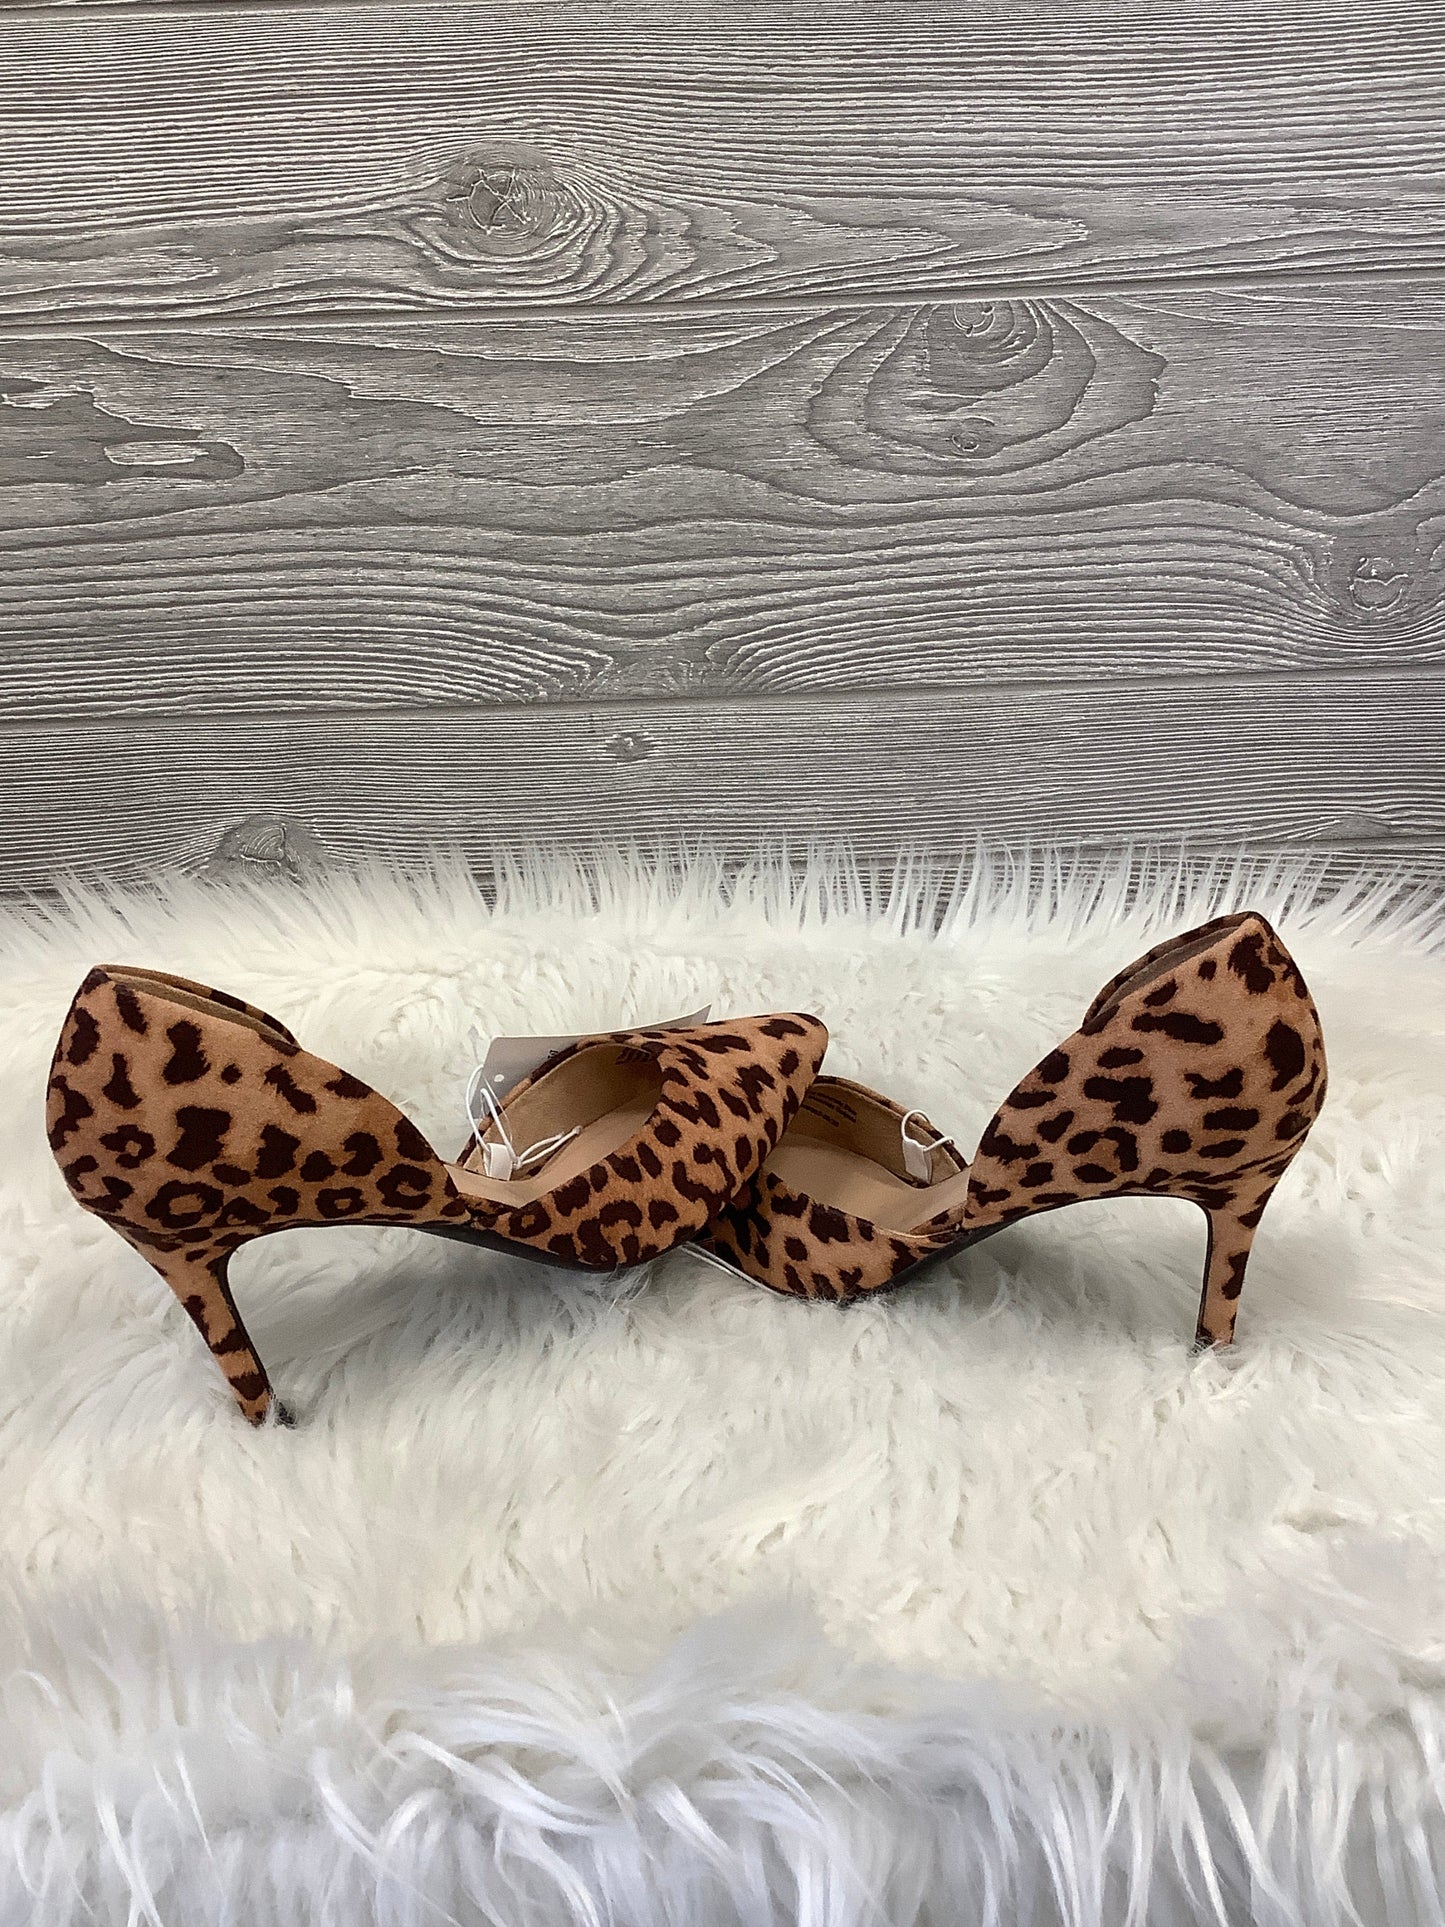 Shoes Heels Stiletto By A New Day  Size: 6